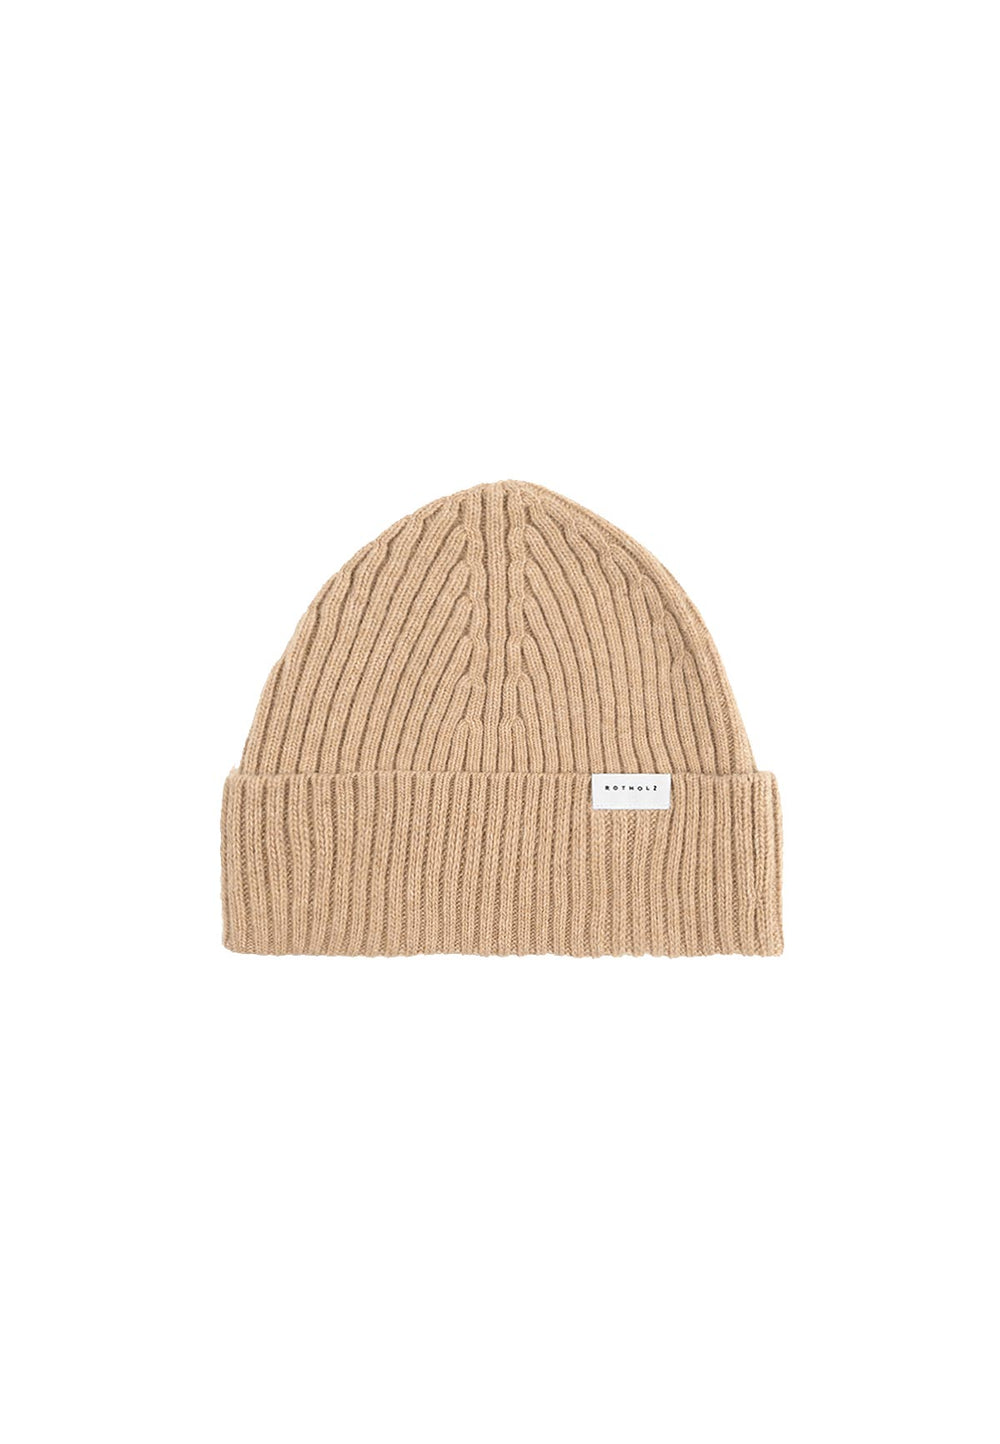 Product photo of a ribbed beanie in beige.